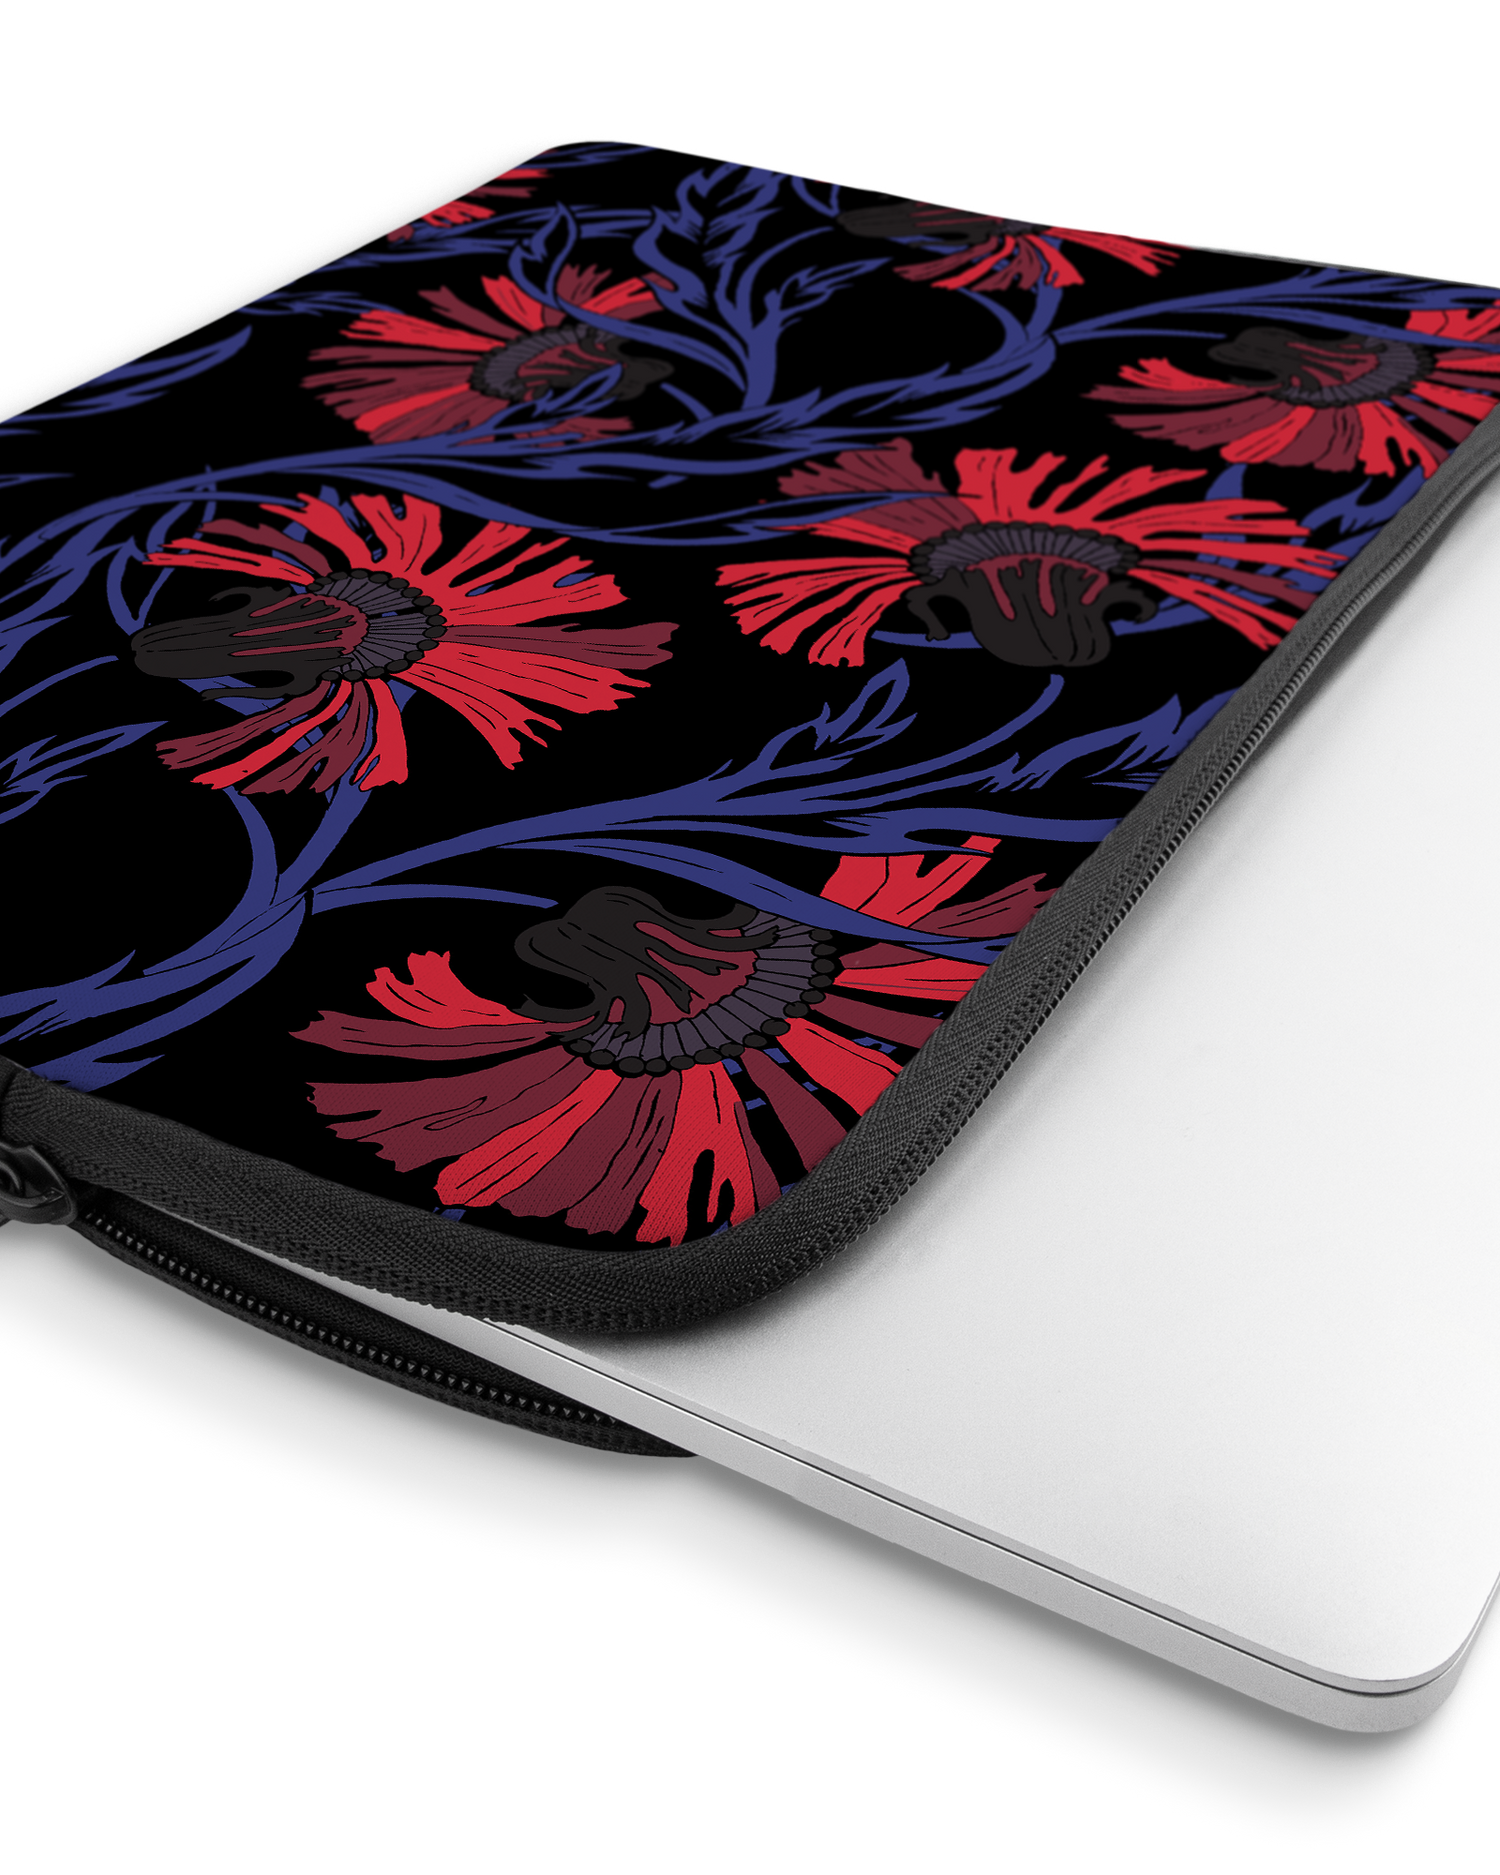 Midnight Floral Laptop Case 13 inch with device inside